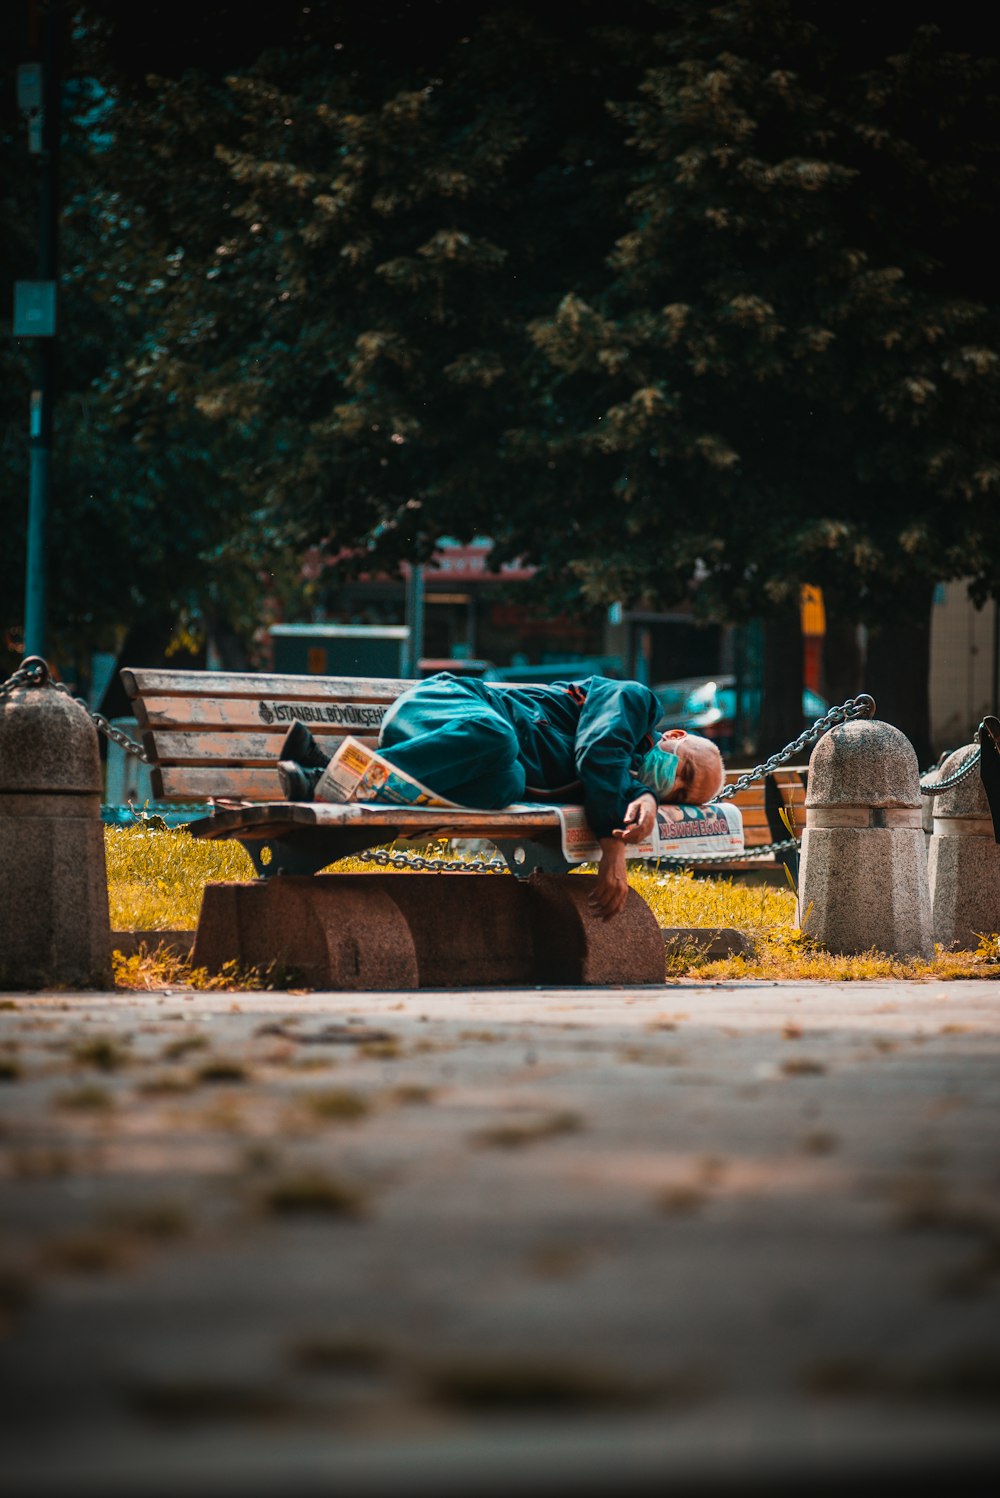 a person sleeping on a bench in a park